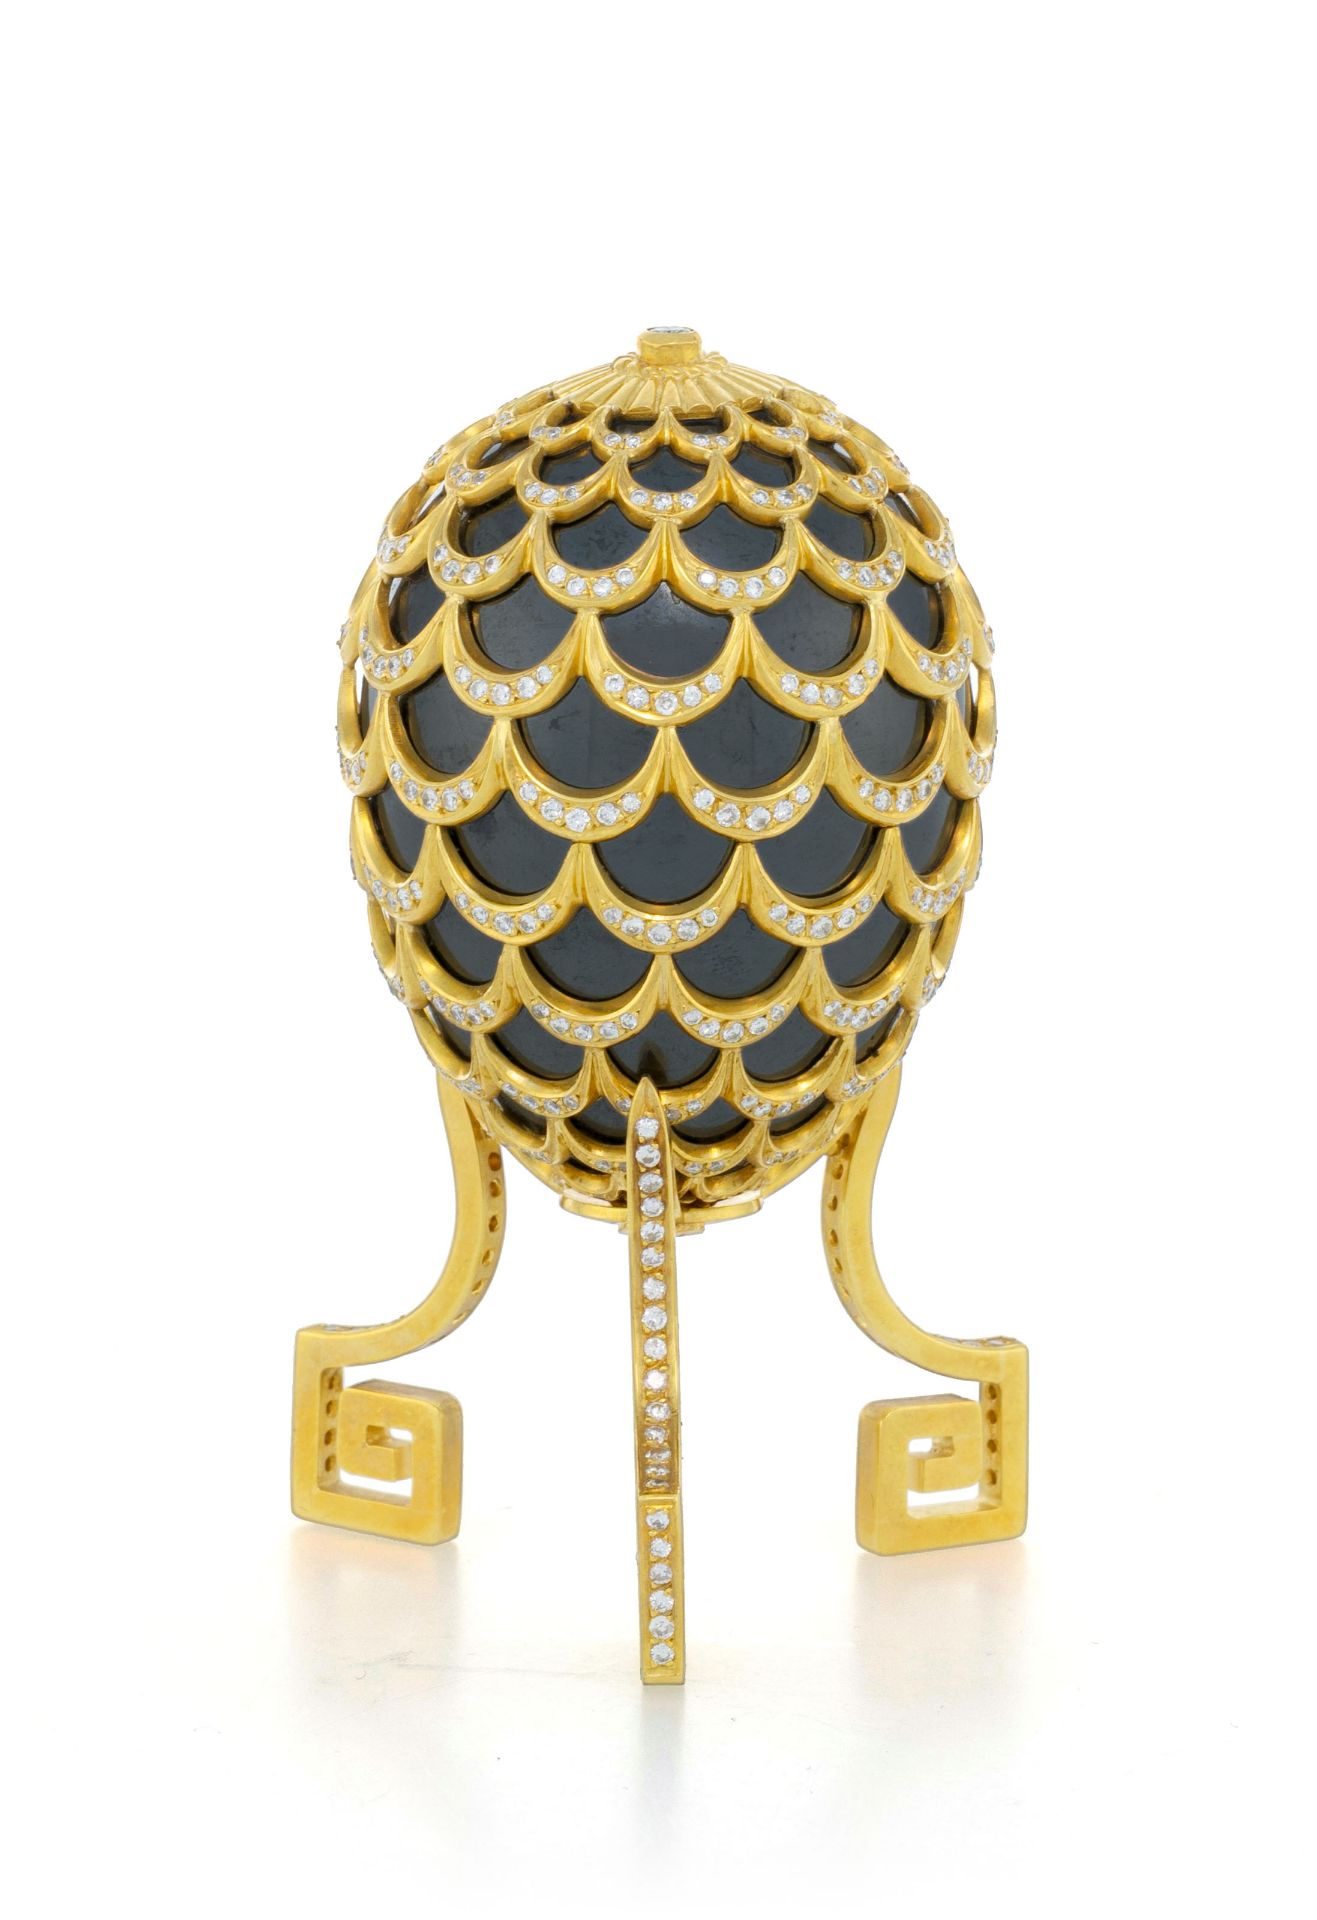 Adler, ornamental egg hematite covered by a pine cone pattern in 18K gold, on its base, set with rou